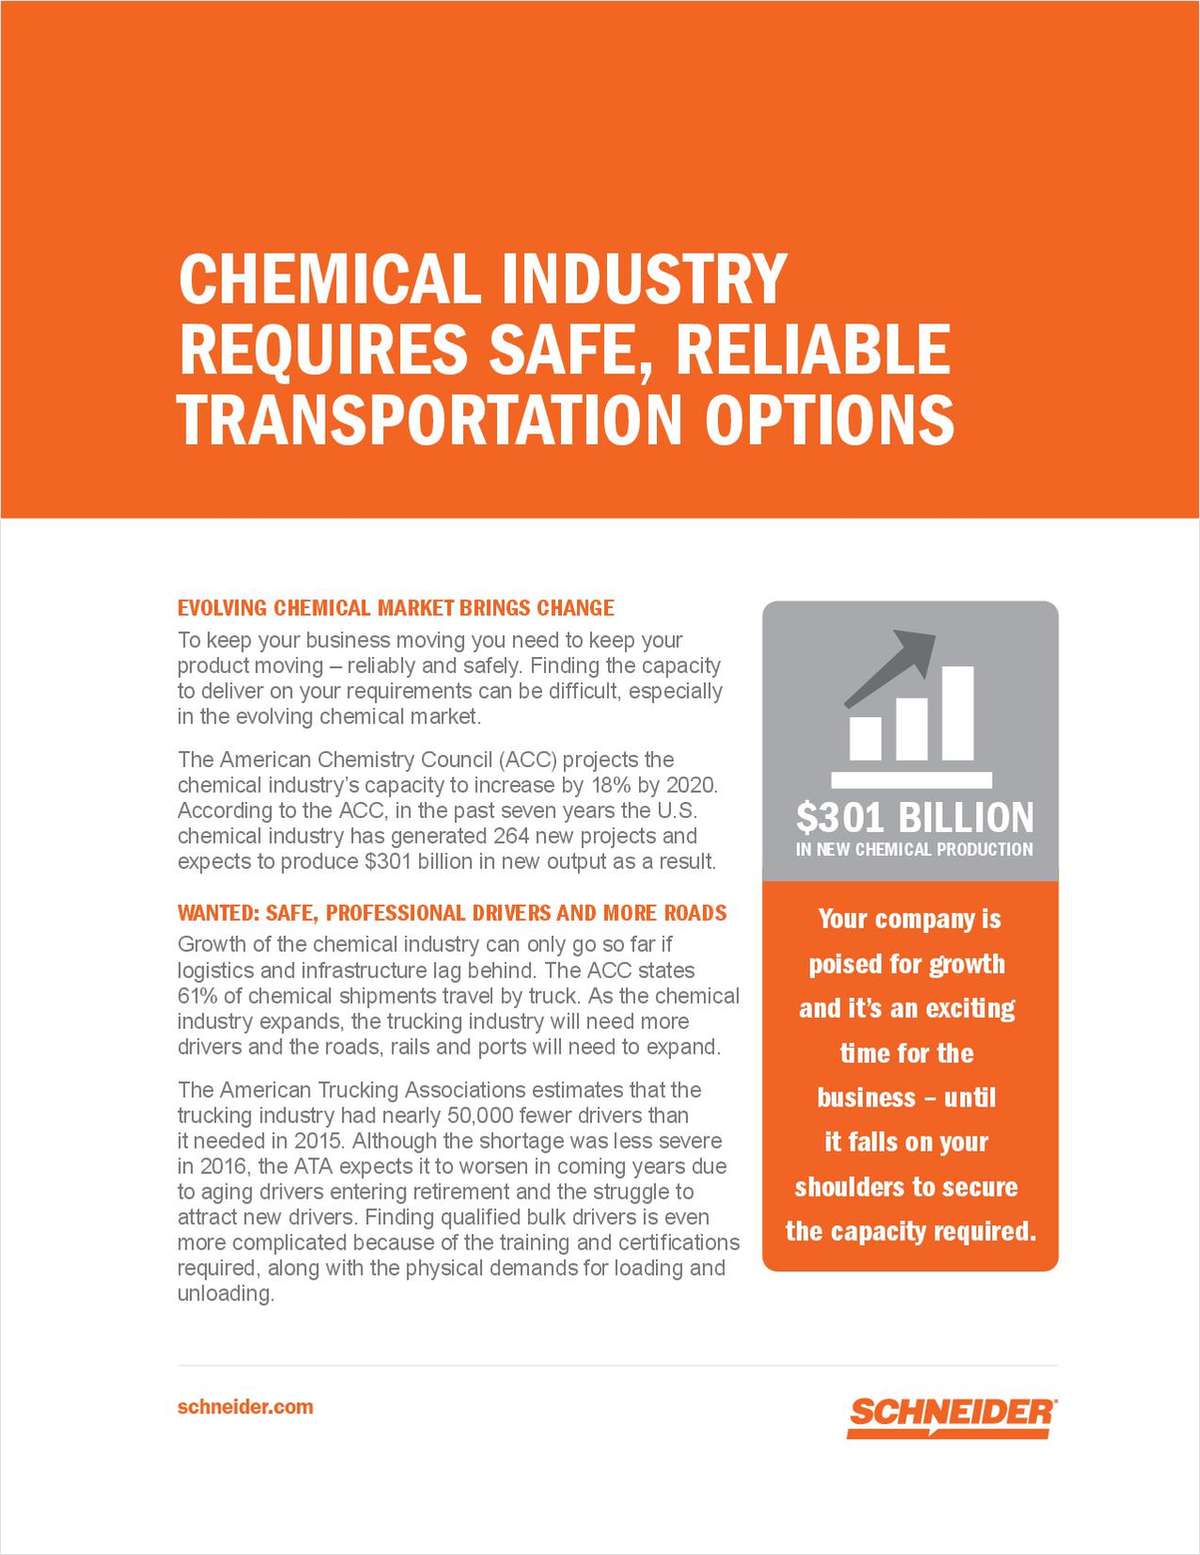 Chemical Industry Requires Safe, Reliable Transportation Options